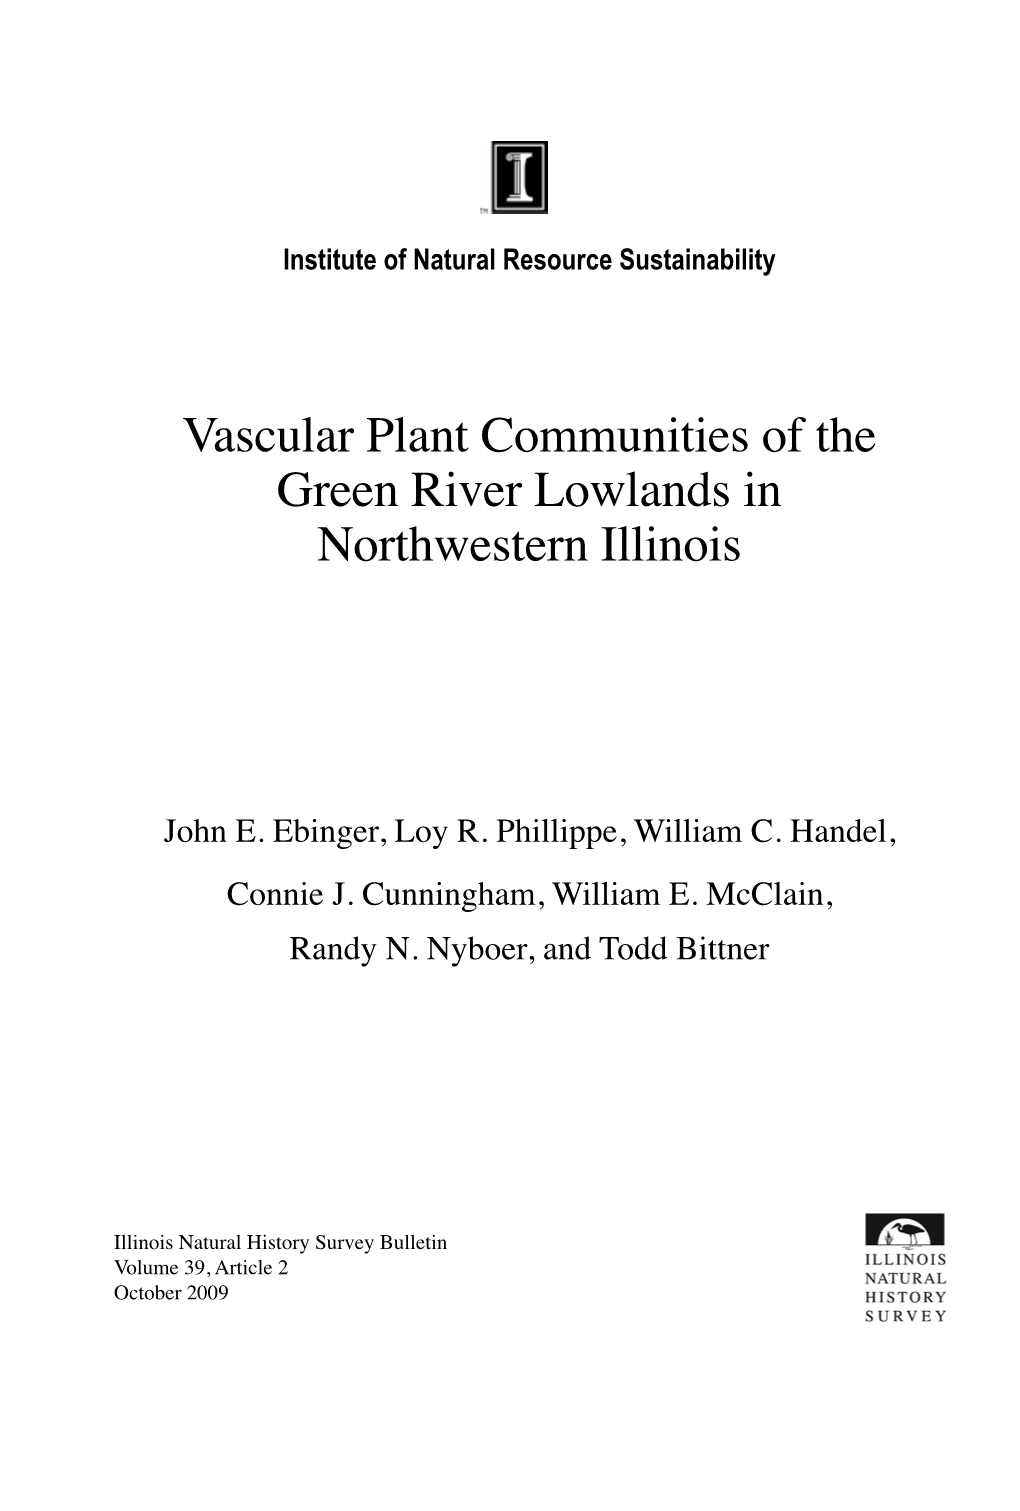 Vascular Plant Communities of the Green River Lowlands in Northwestern Illinois